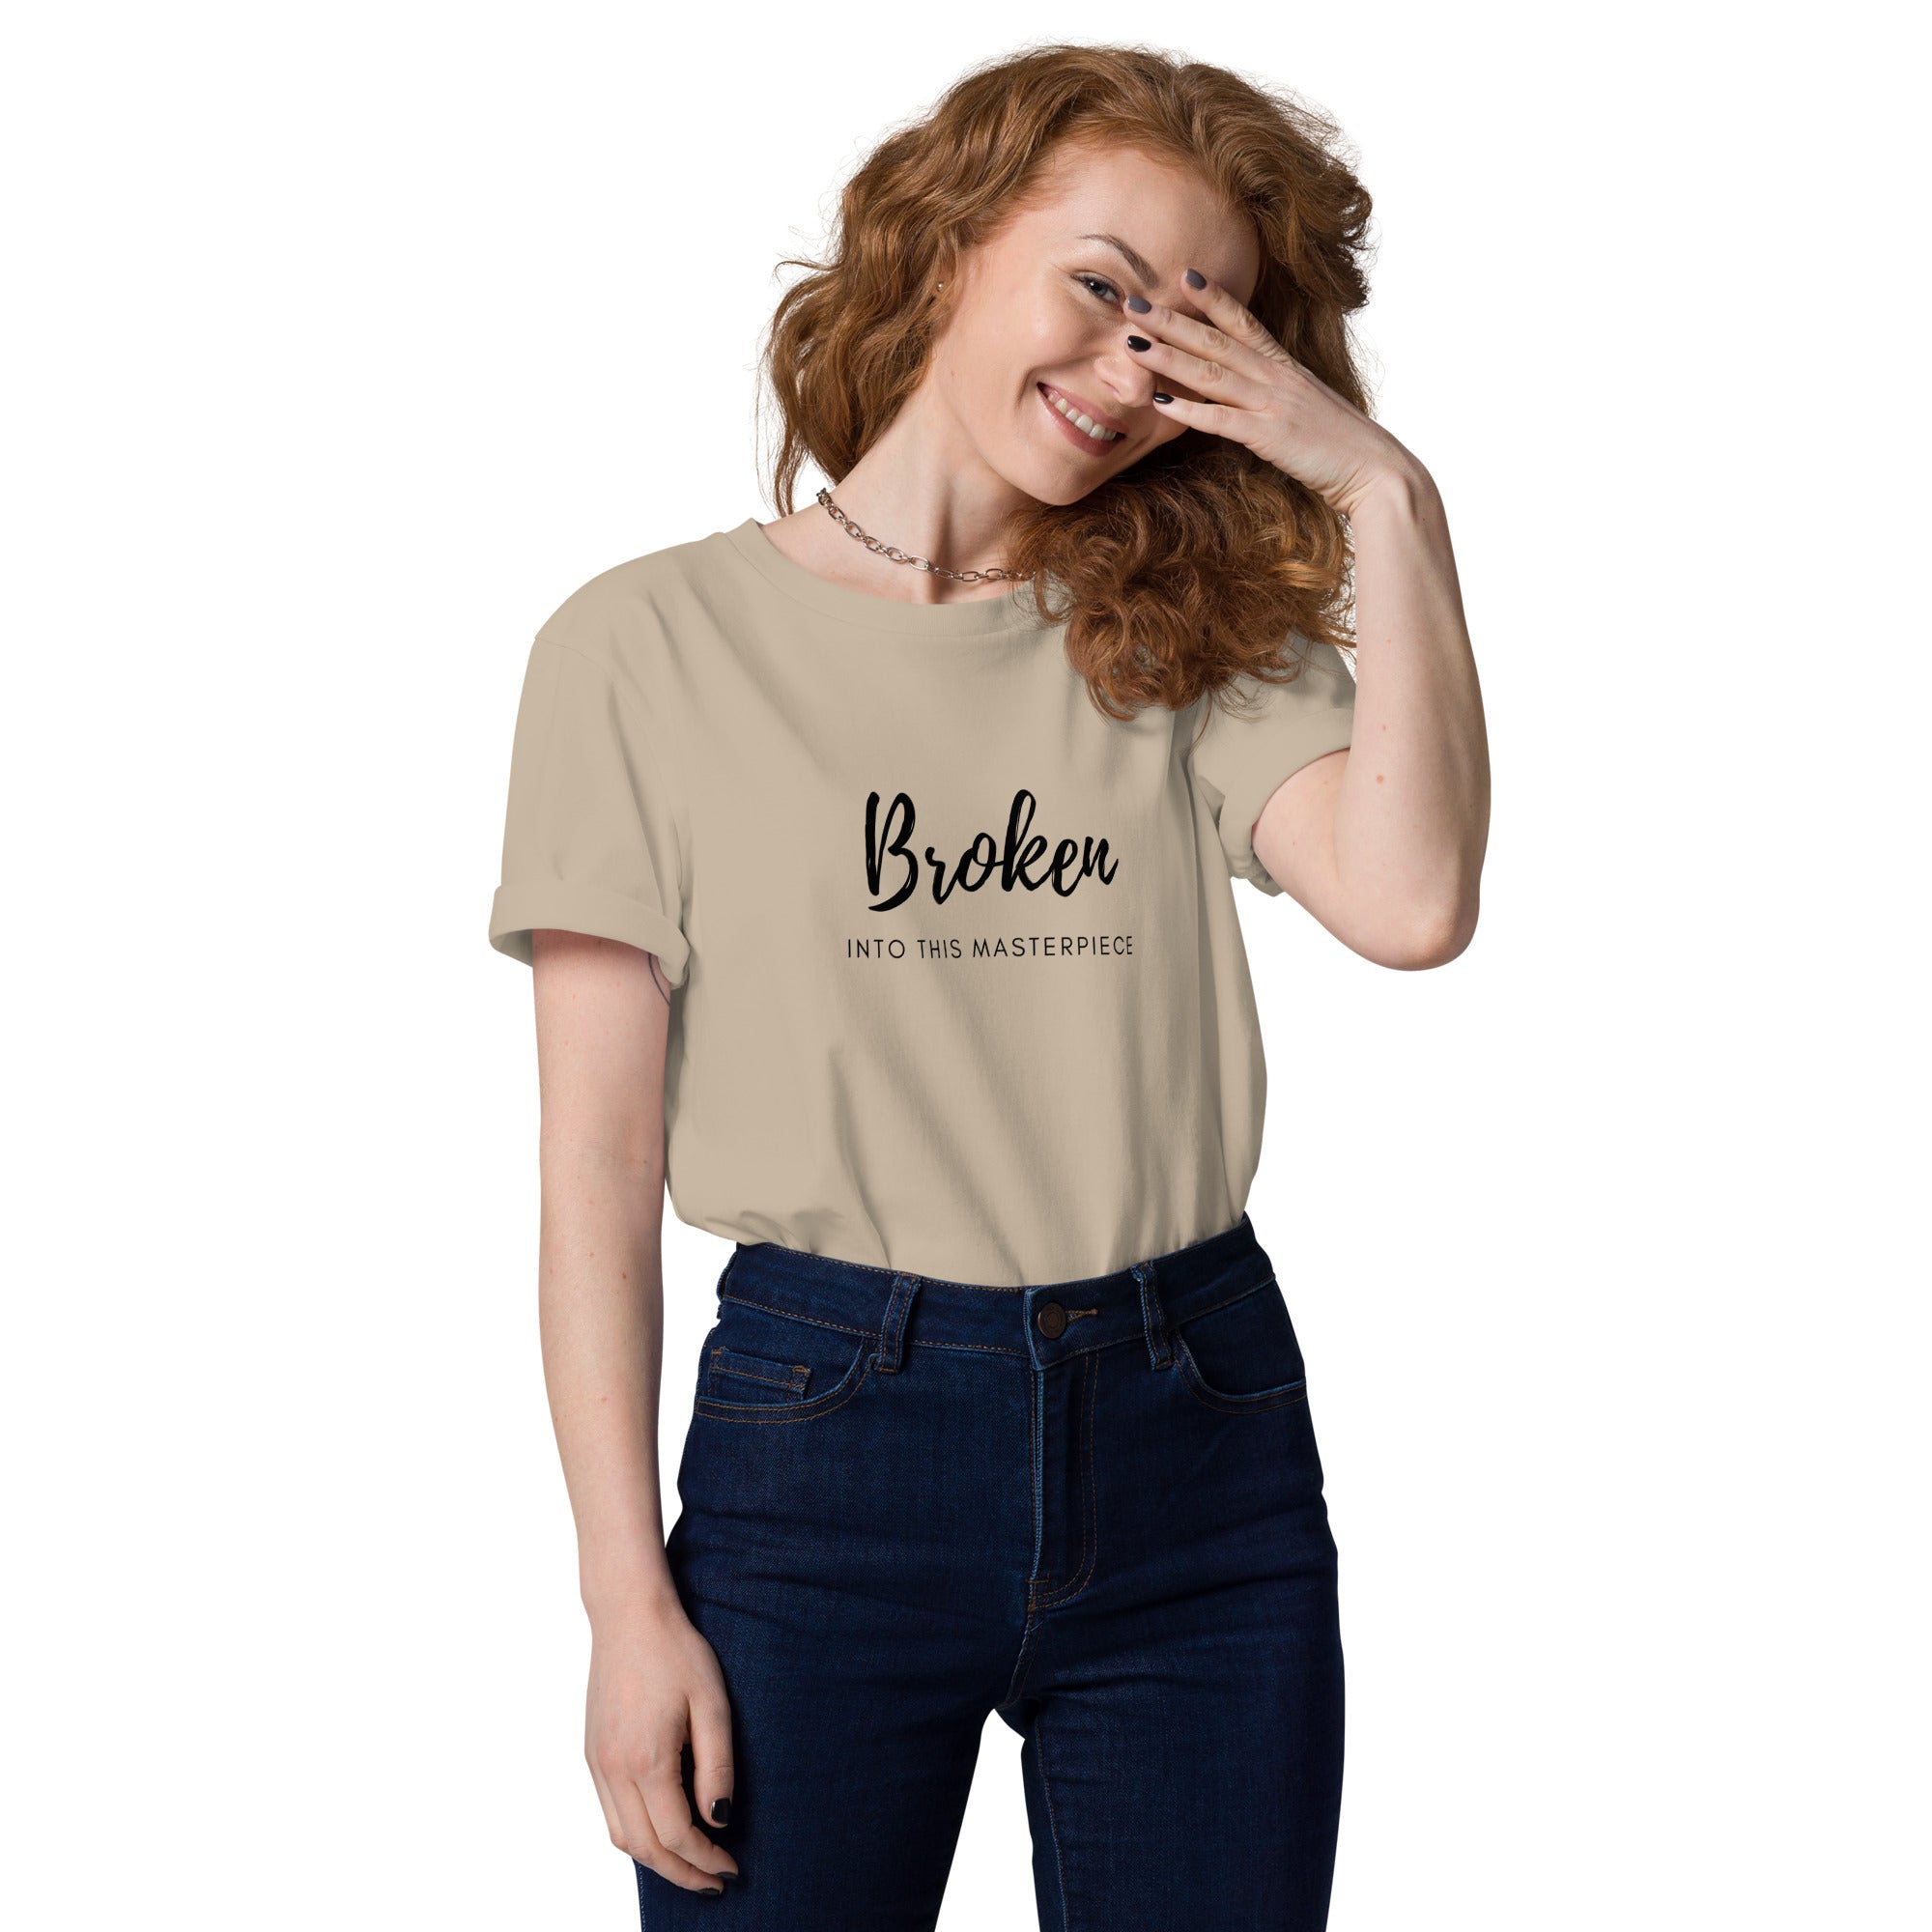 "Broken into this Masterpiece" Organic Cotton T-Shirt – Wear Your Story Proudly